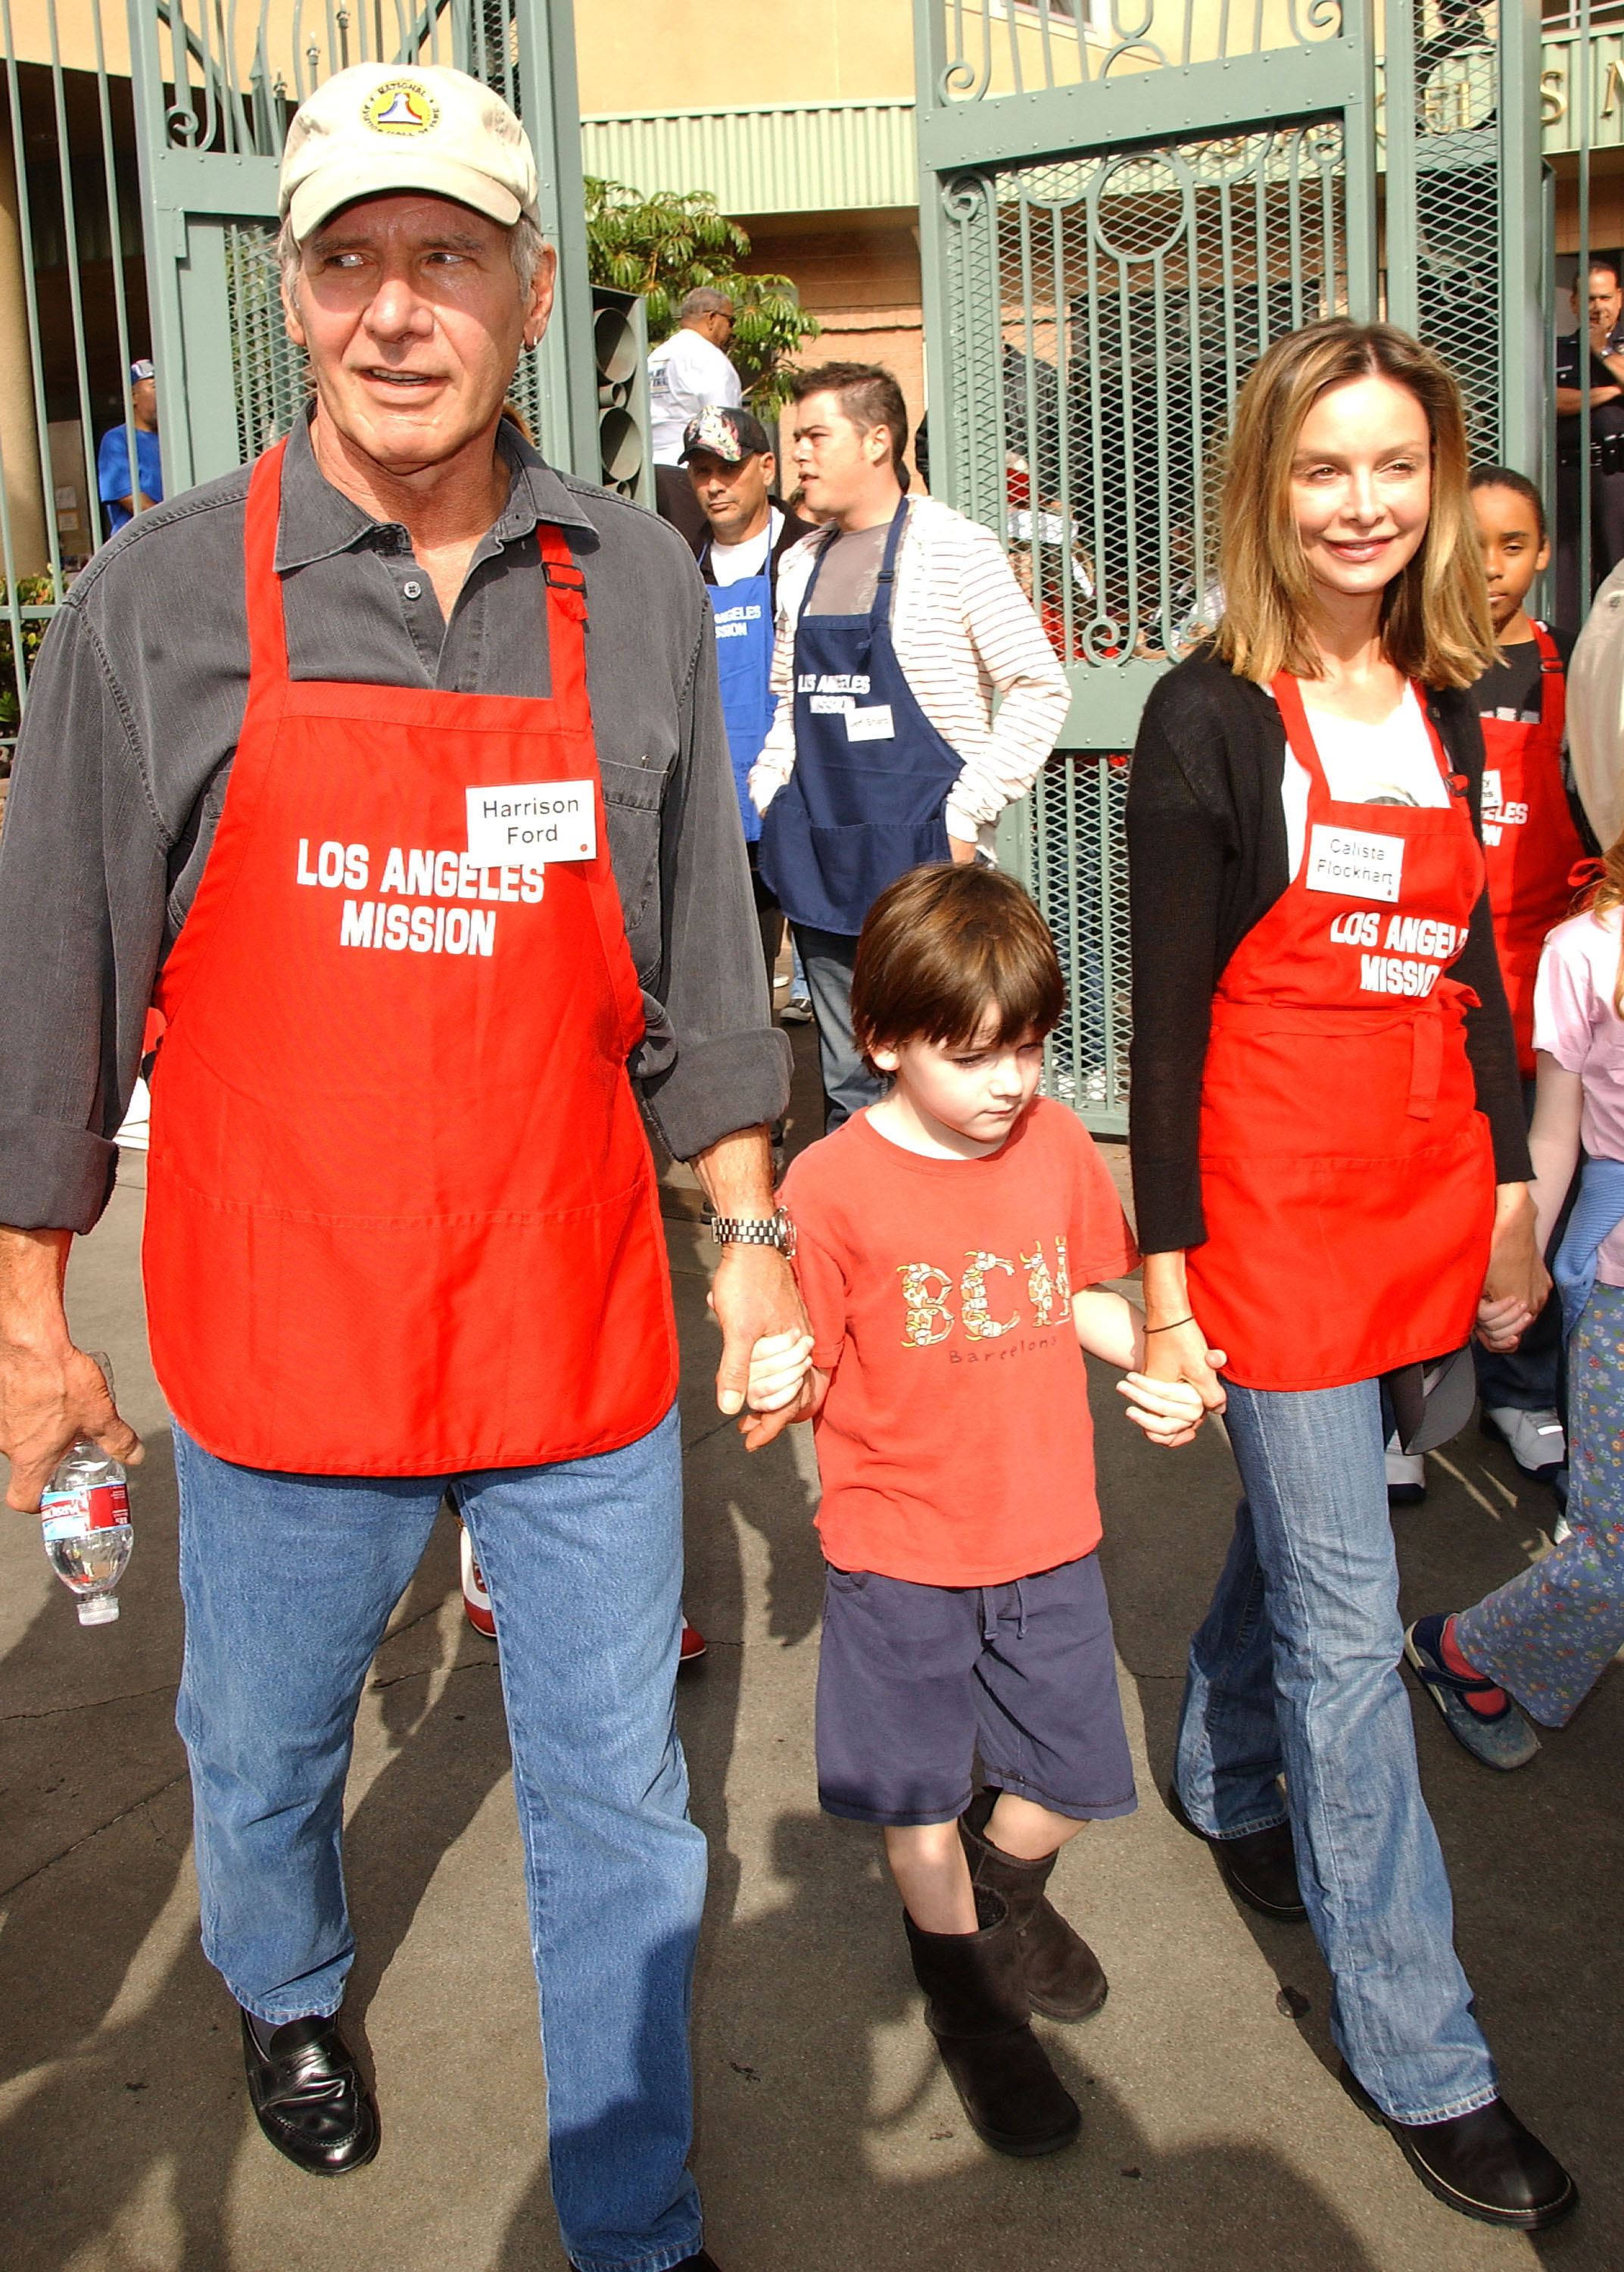 Calista Flockhart, Harrison Ford, and their son, Liam, at the Los Angeles Mission in 2007 | Source: Getty Images